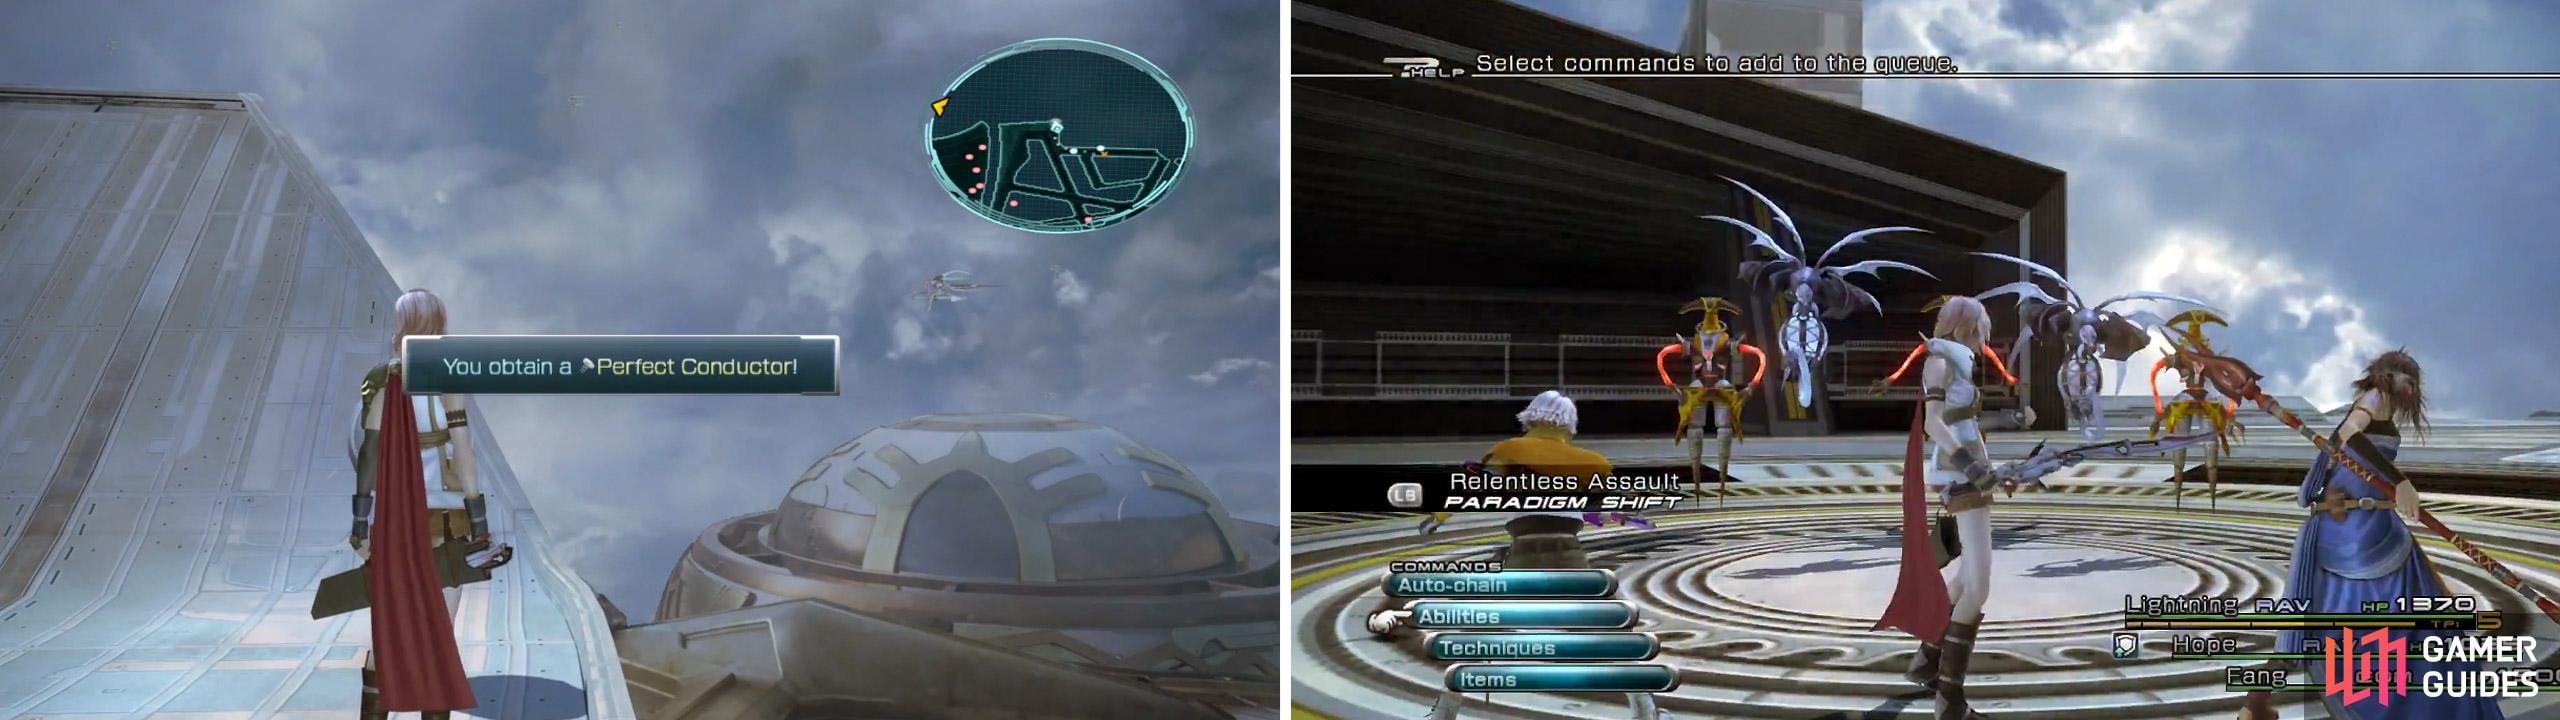 Perfect conductor location (left) and the 2x Vespid Soldier/ 3x Deck Drone battle (right).